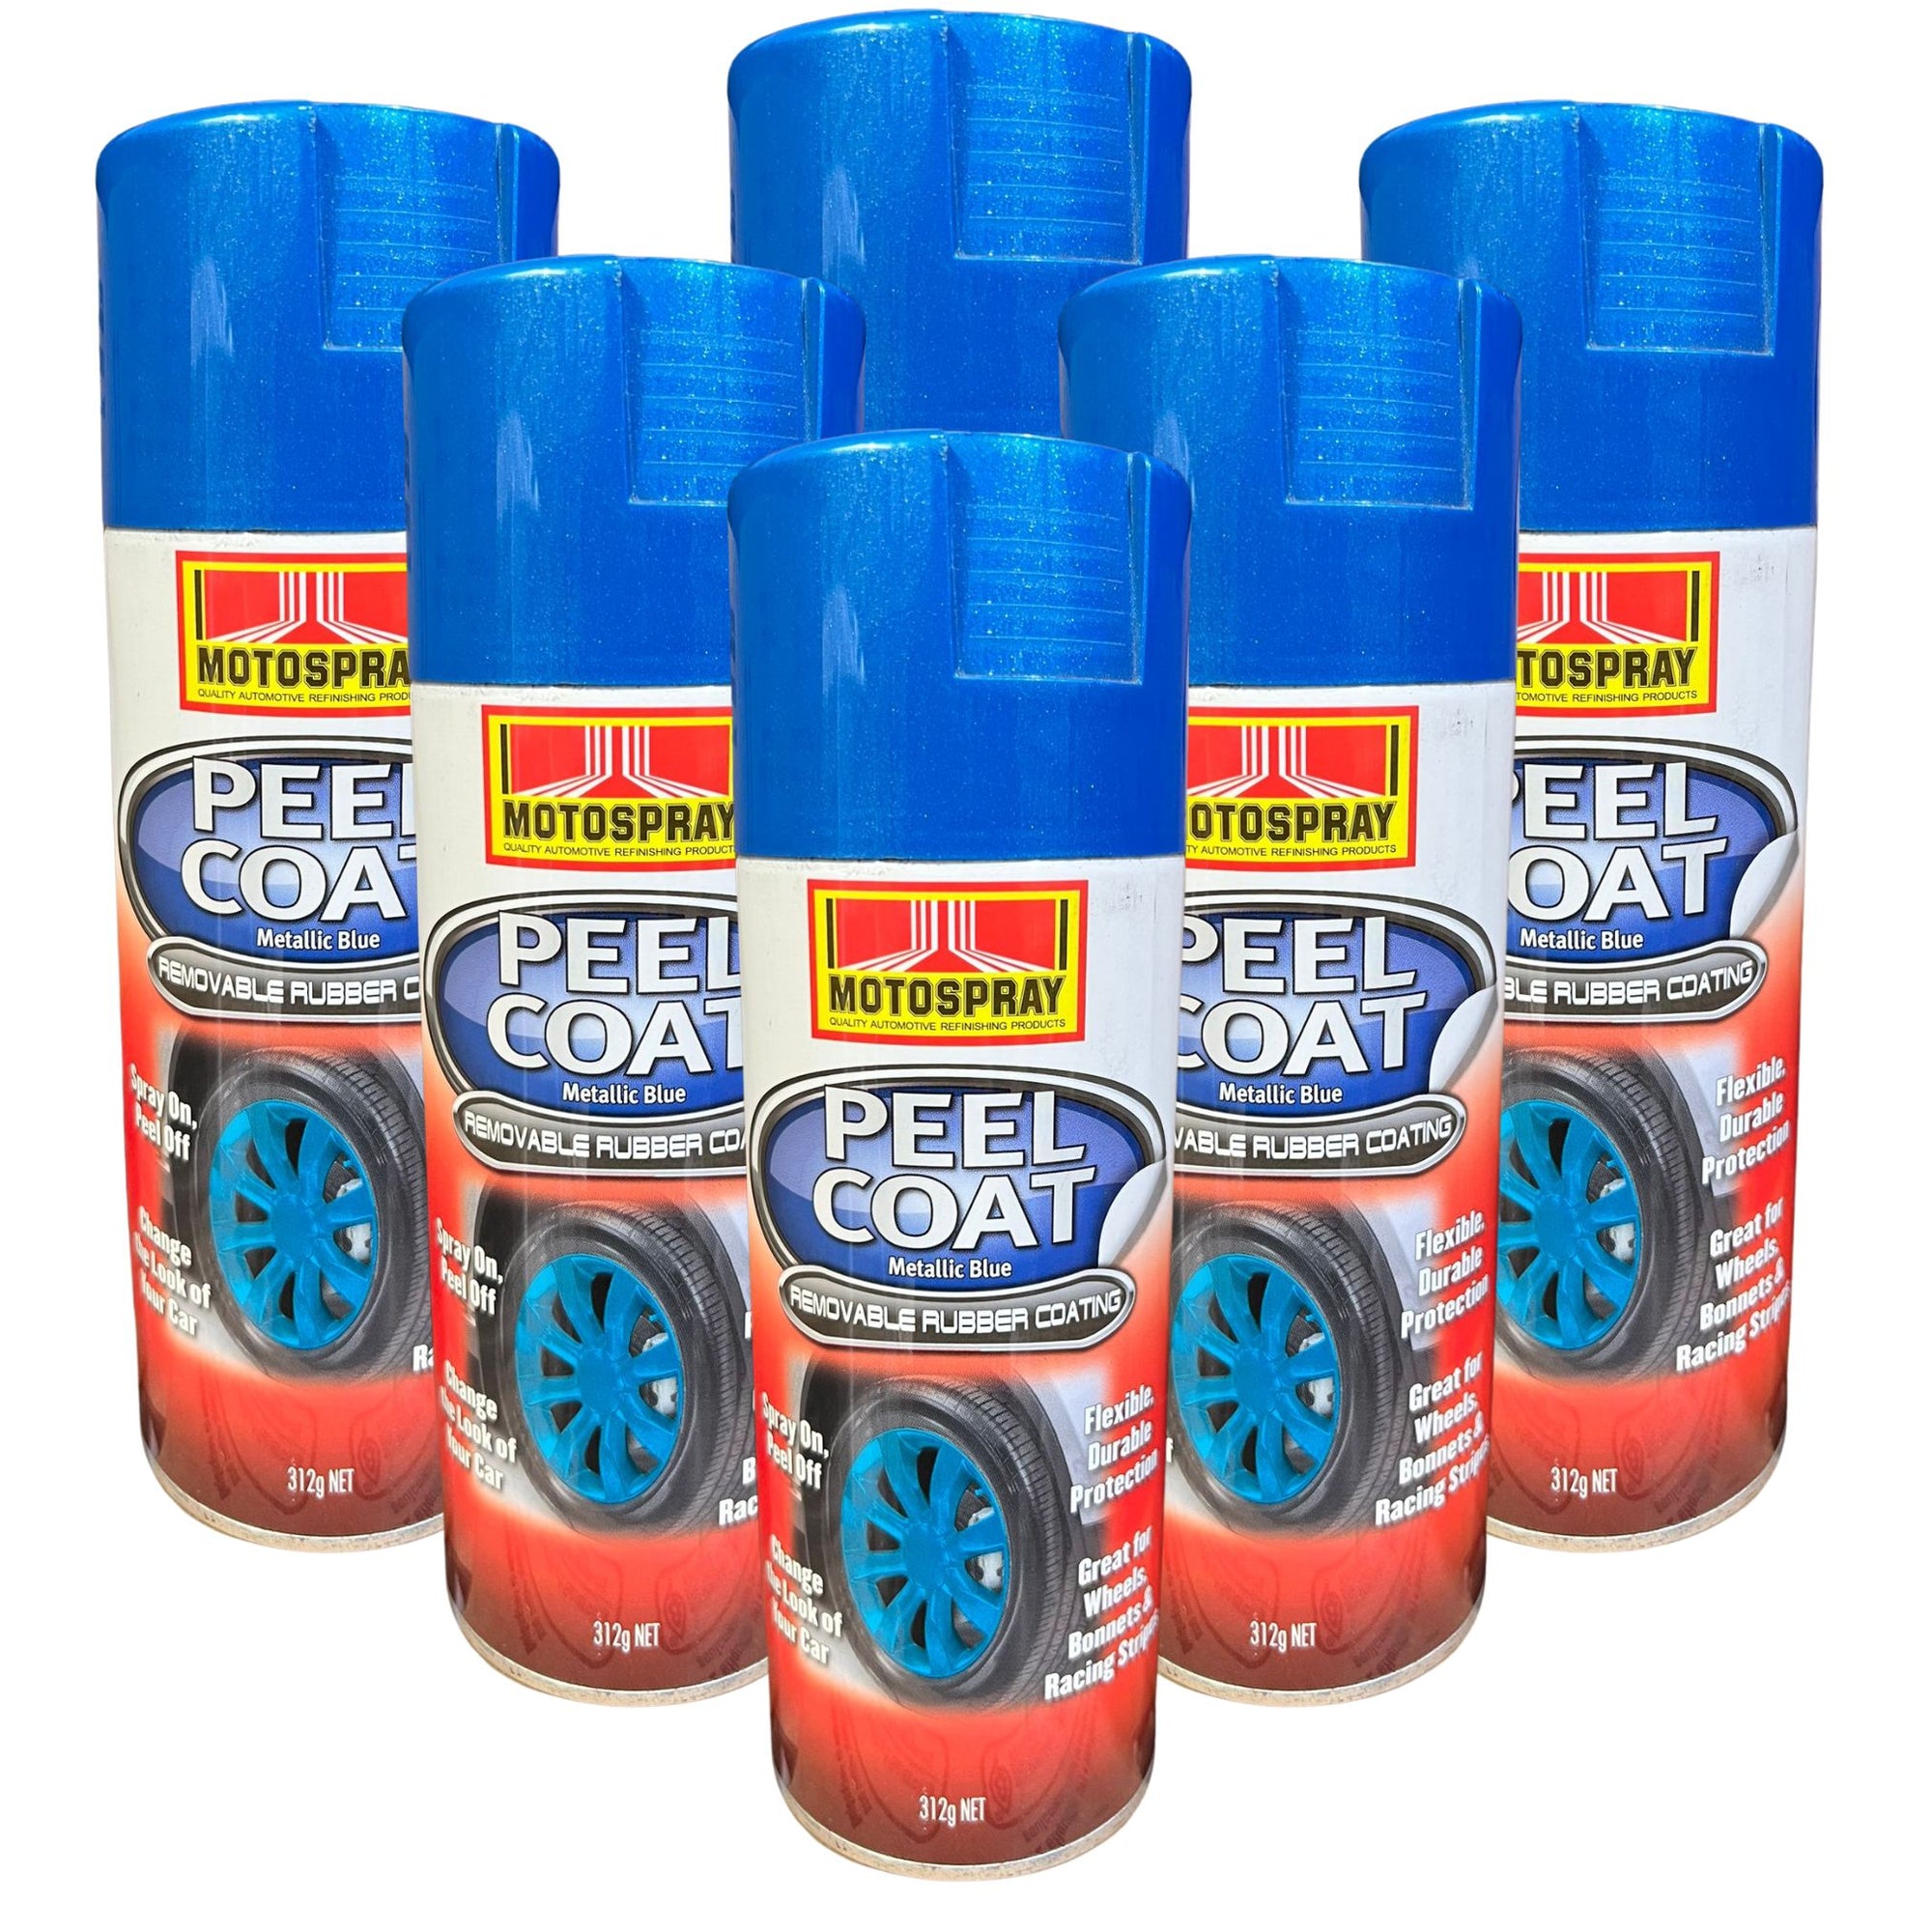 Motospray Peel Coat Rubberized Removable Coating - Metallic Blue - 6 Pack - South East Clearance Centre